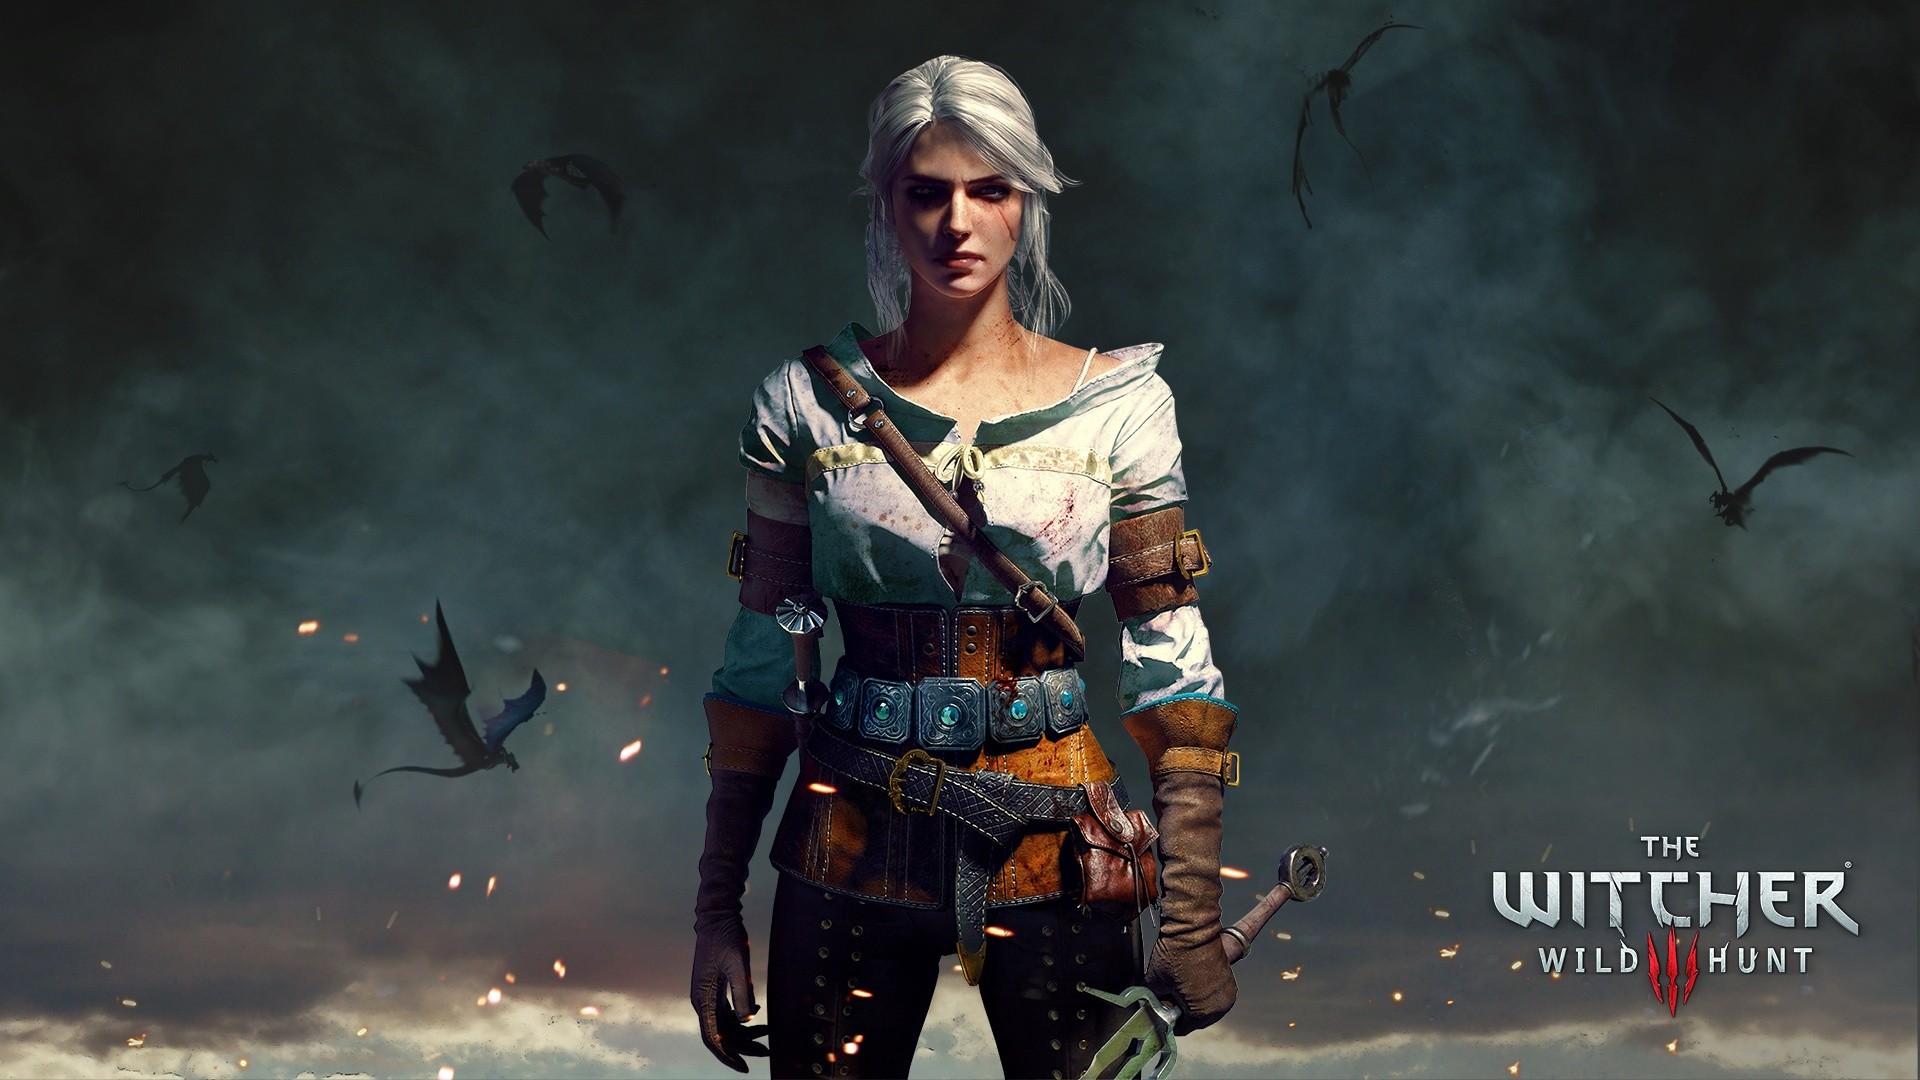 1920x1080 The Witcher 3 Wild hunt Yennefer wallpapers (89 Wallpapers) – HD Wallpapers